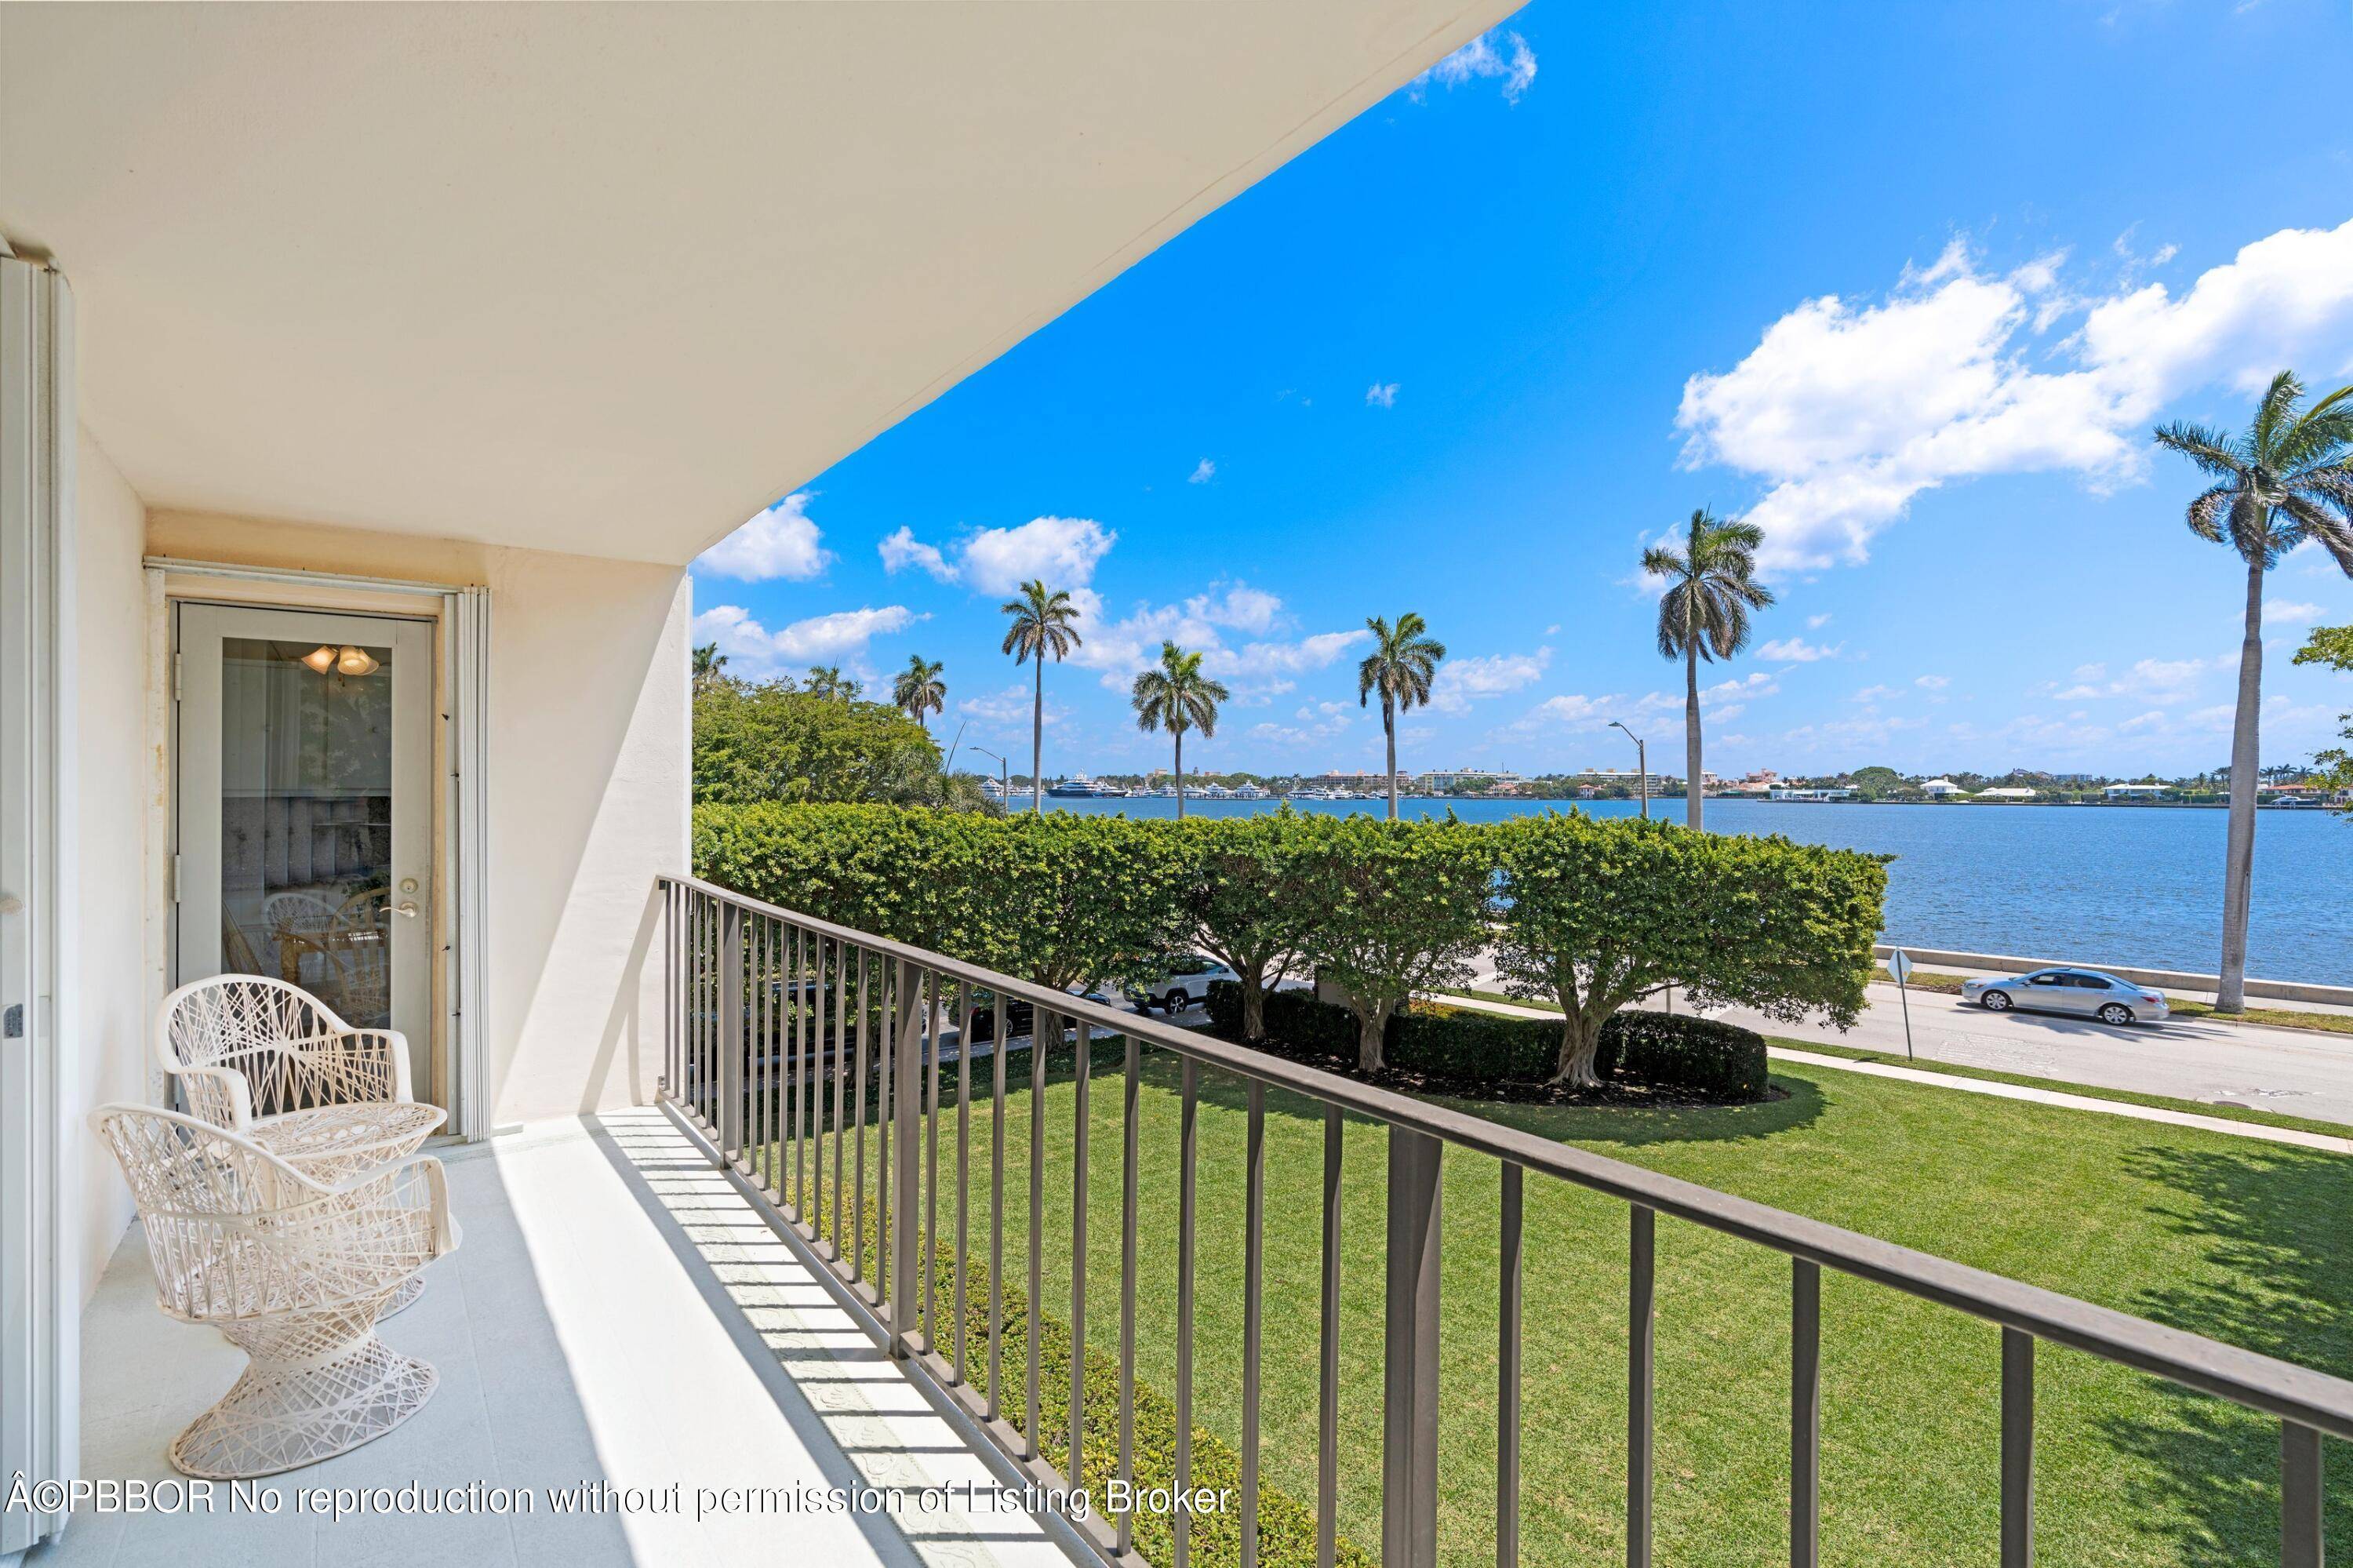 Waterfront 3 bedroom, 2 bath at Rapallo South offers direct intracoastal views and nearly 1, 900 total square feet.